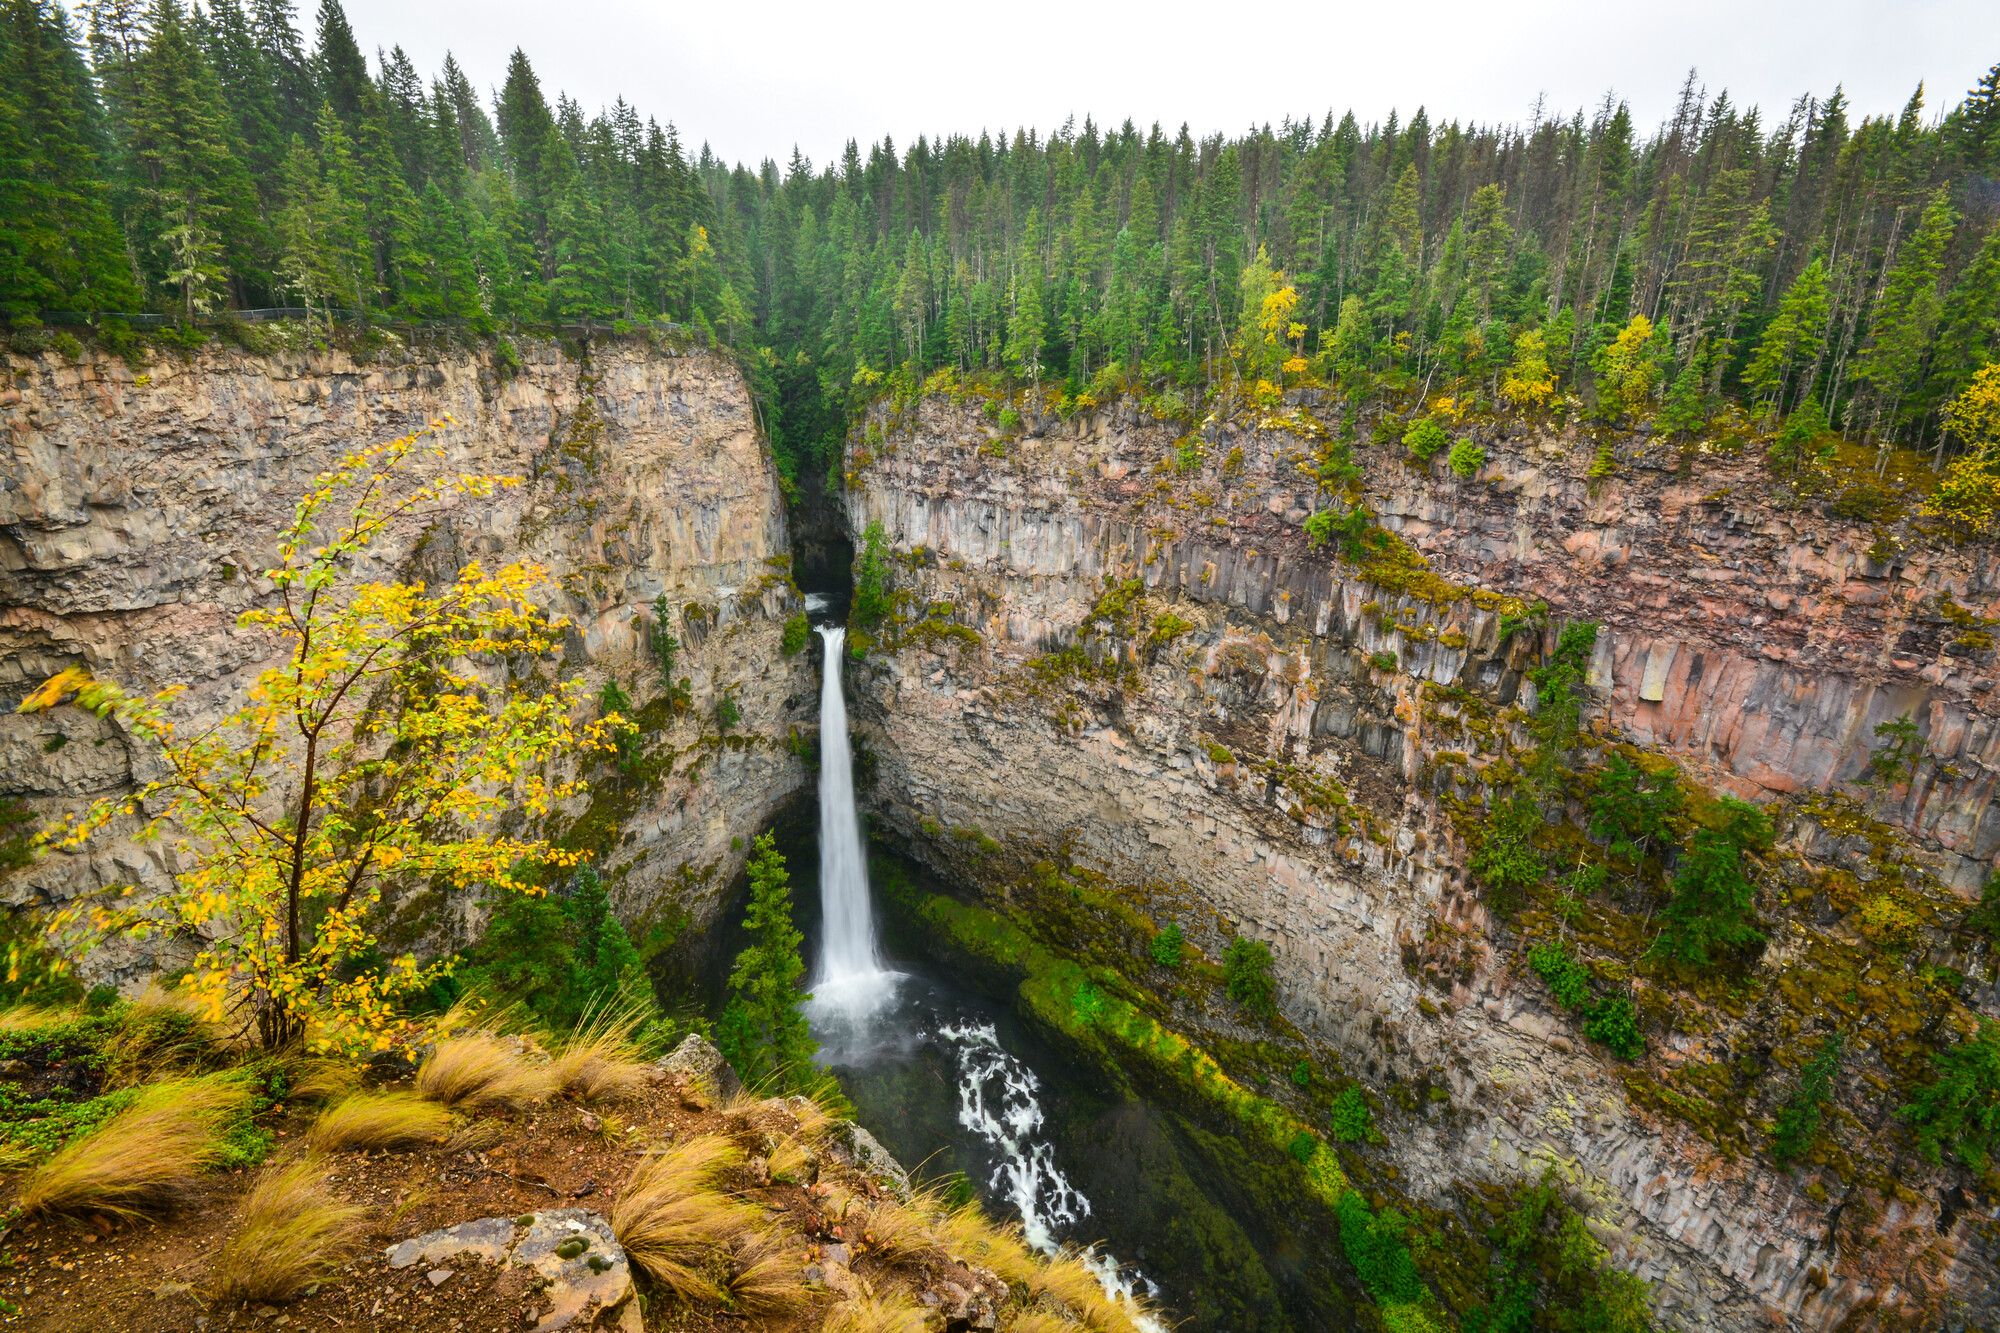 Spahats Creek Falls evokes awe as it plunges 75 meters into the depths. Its thunderous roar echoes through the surrounding landscape. Wells Gray Park.